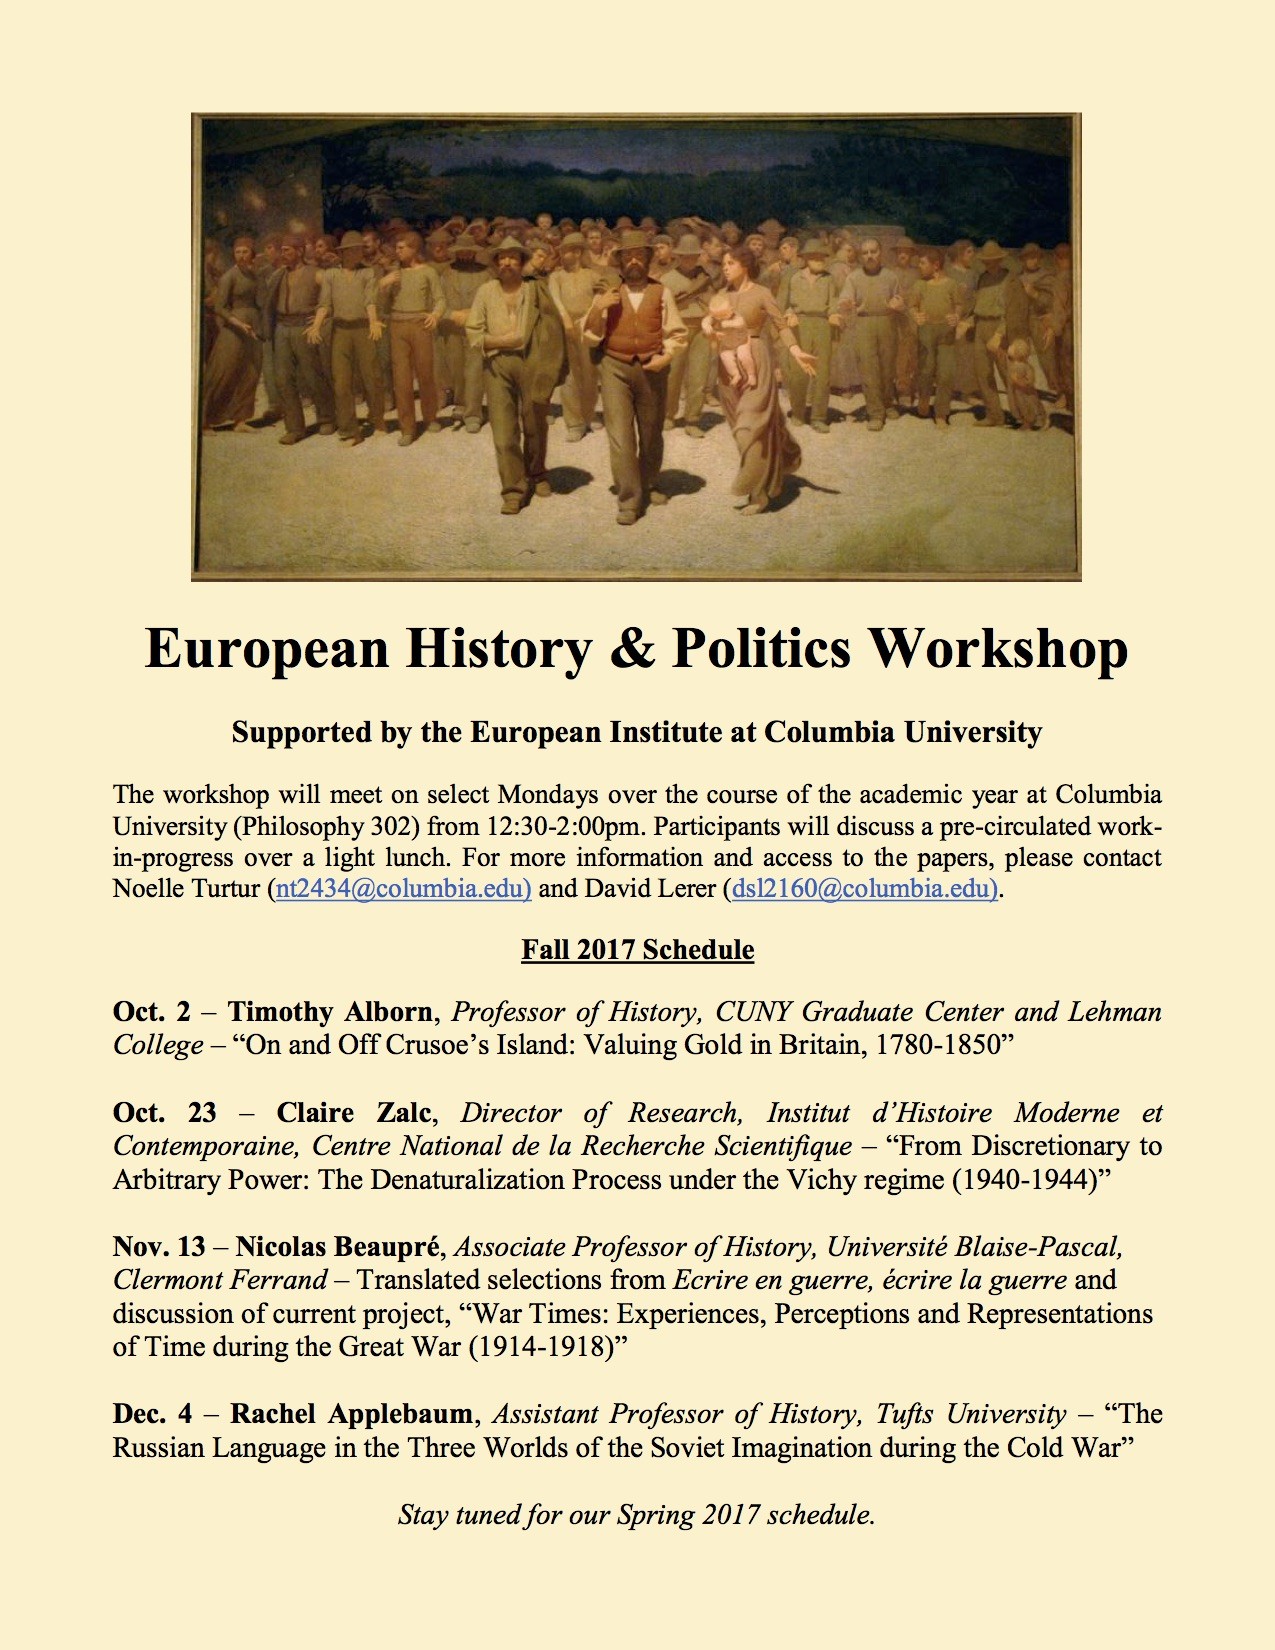 Flyer for the European history & politics workshop, featuring a image of European painting